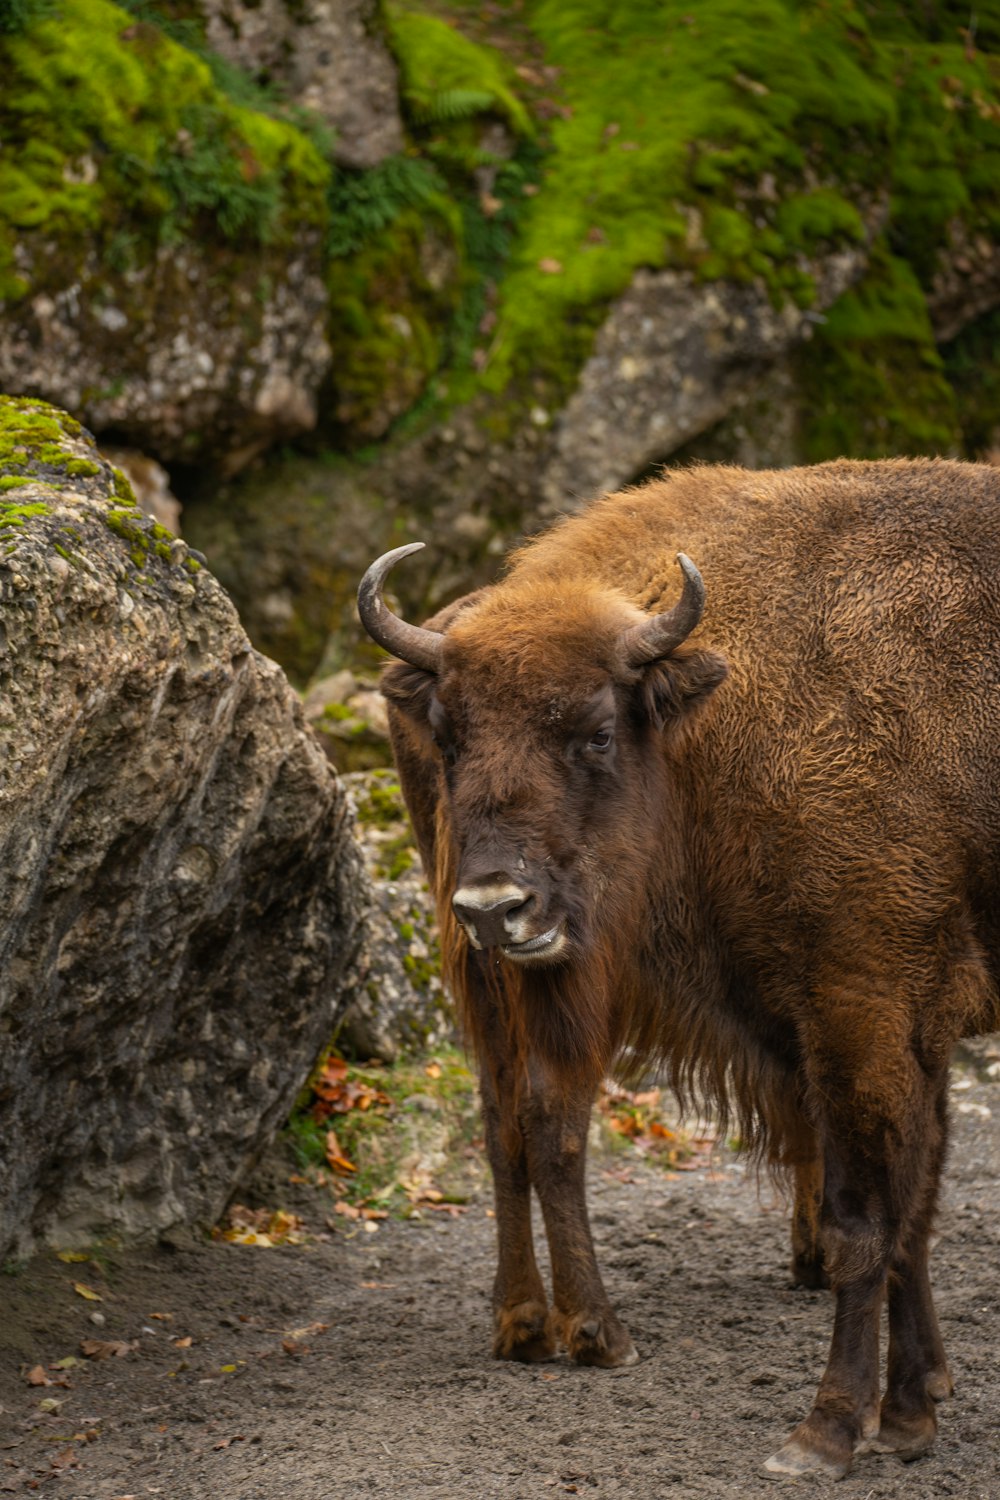 a bison standing on a dirt road next to a large rock